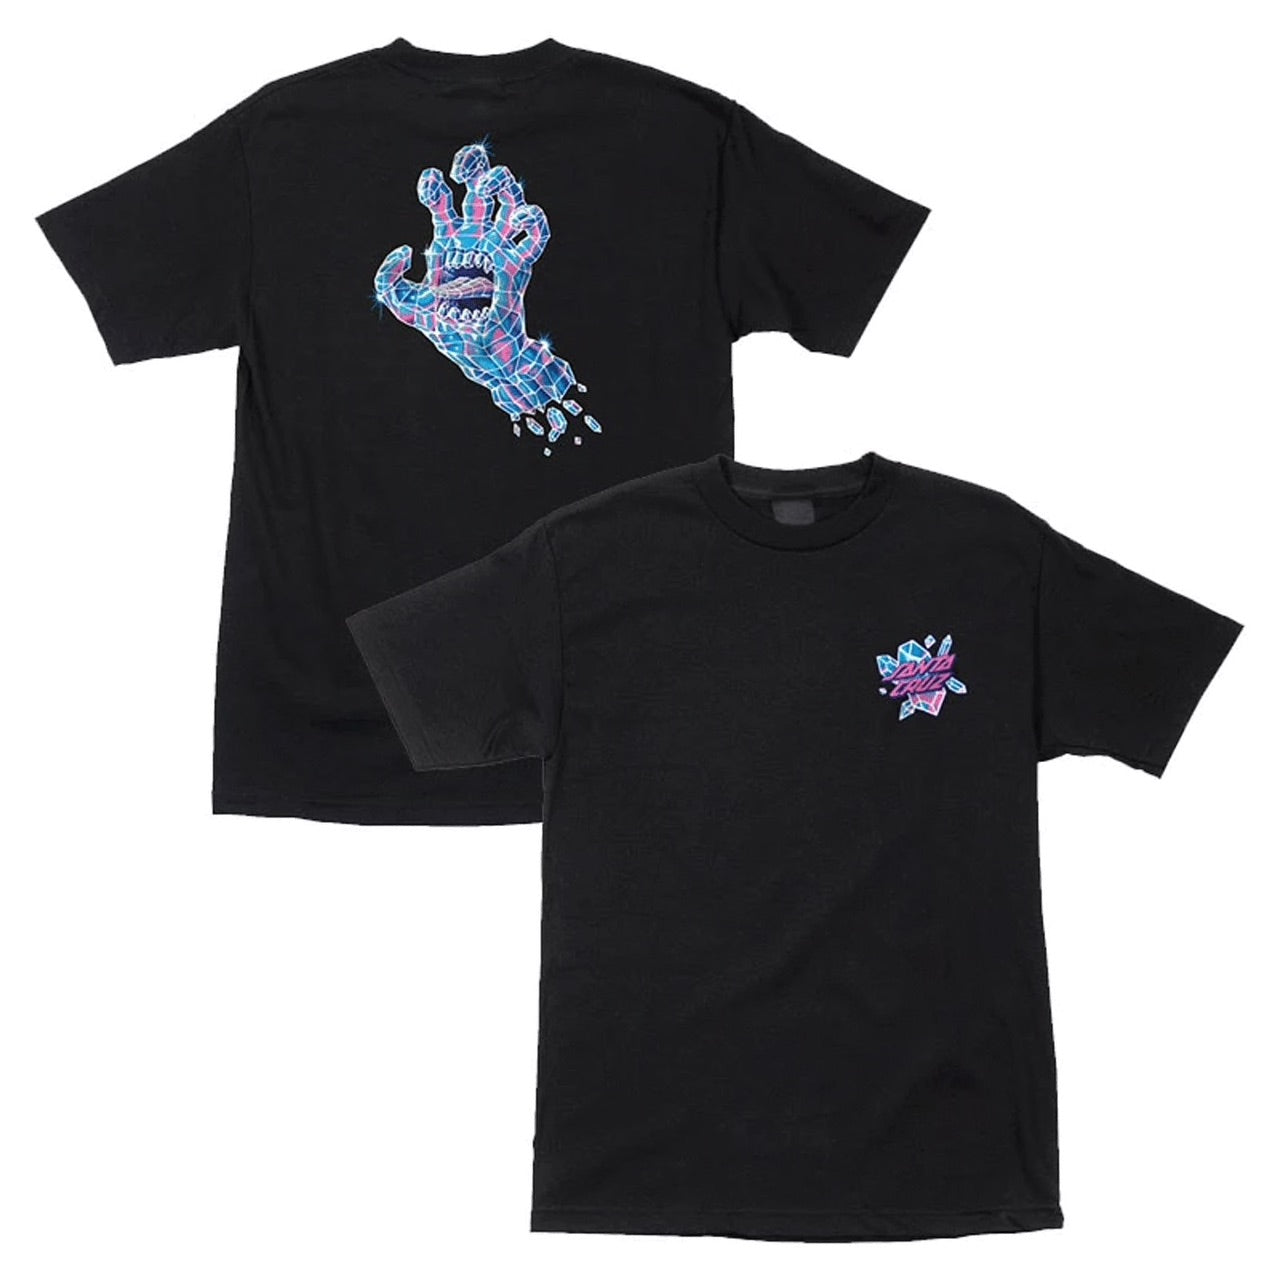 Crystal Hand S/S Tee Shirt Blk (size options listed)